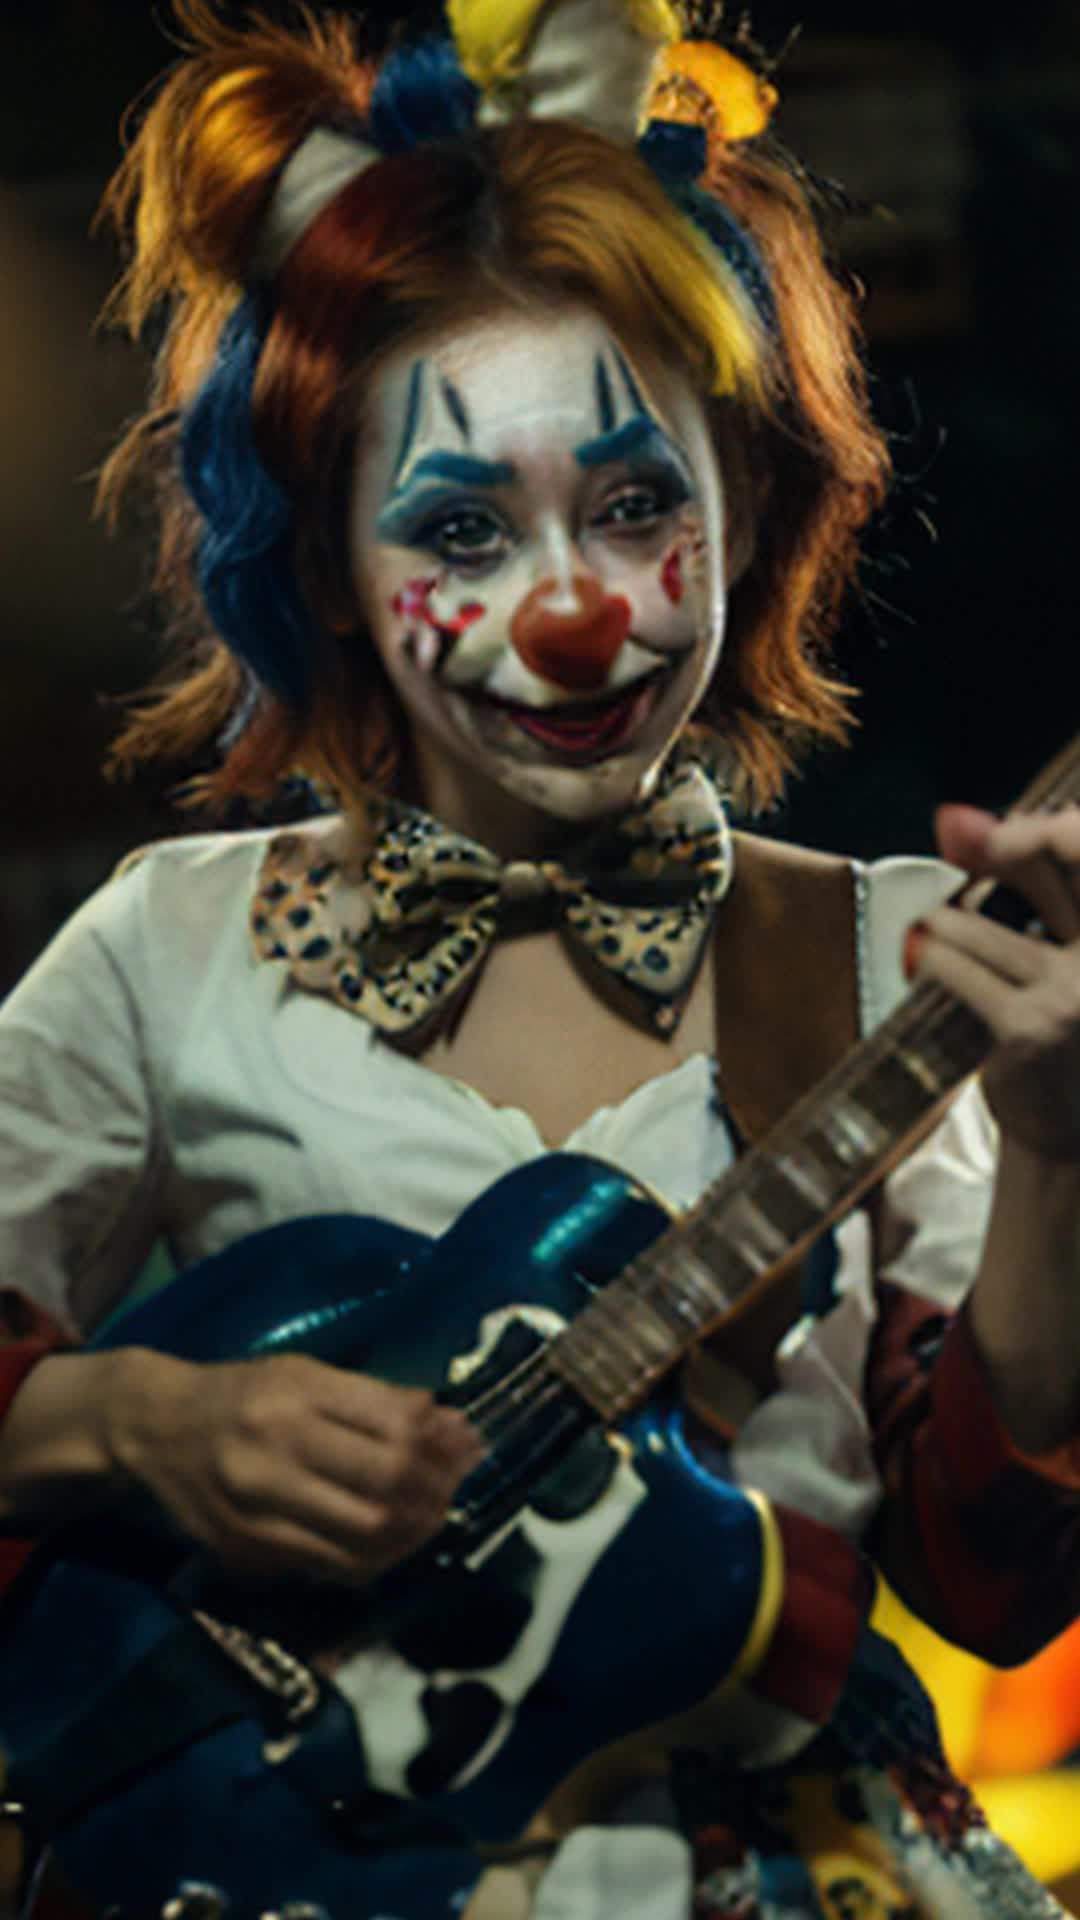 CLOWN GIRL WITH HER MIDDLE FINGER UP AND HOLDING A GUITAR 